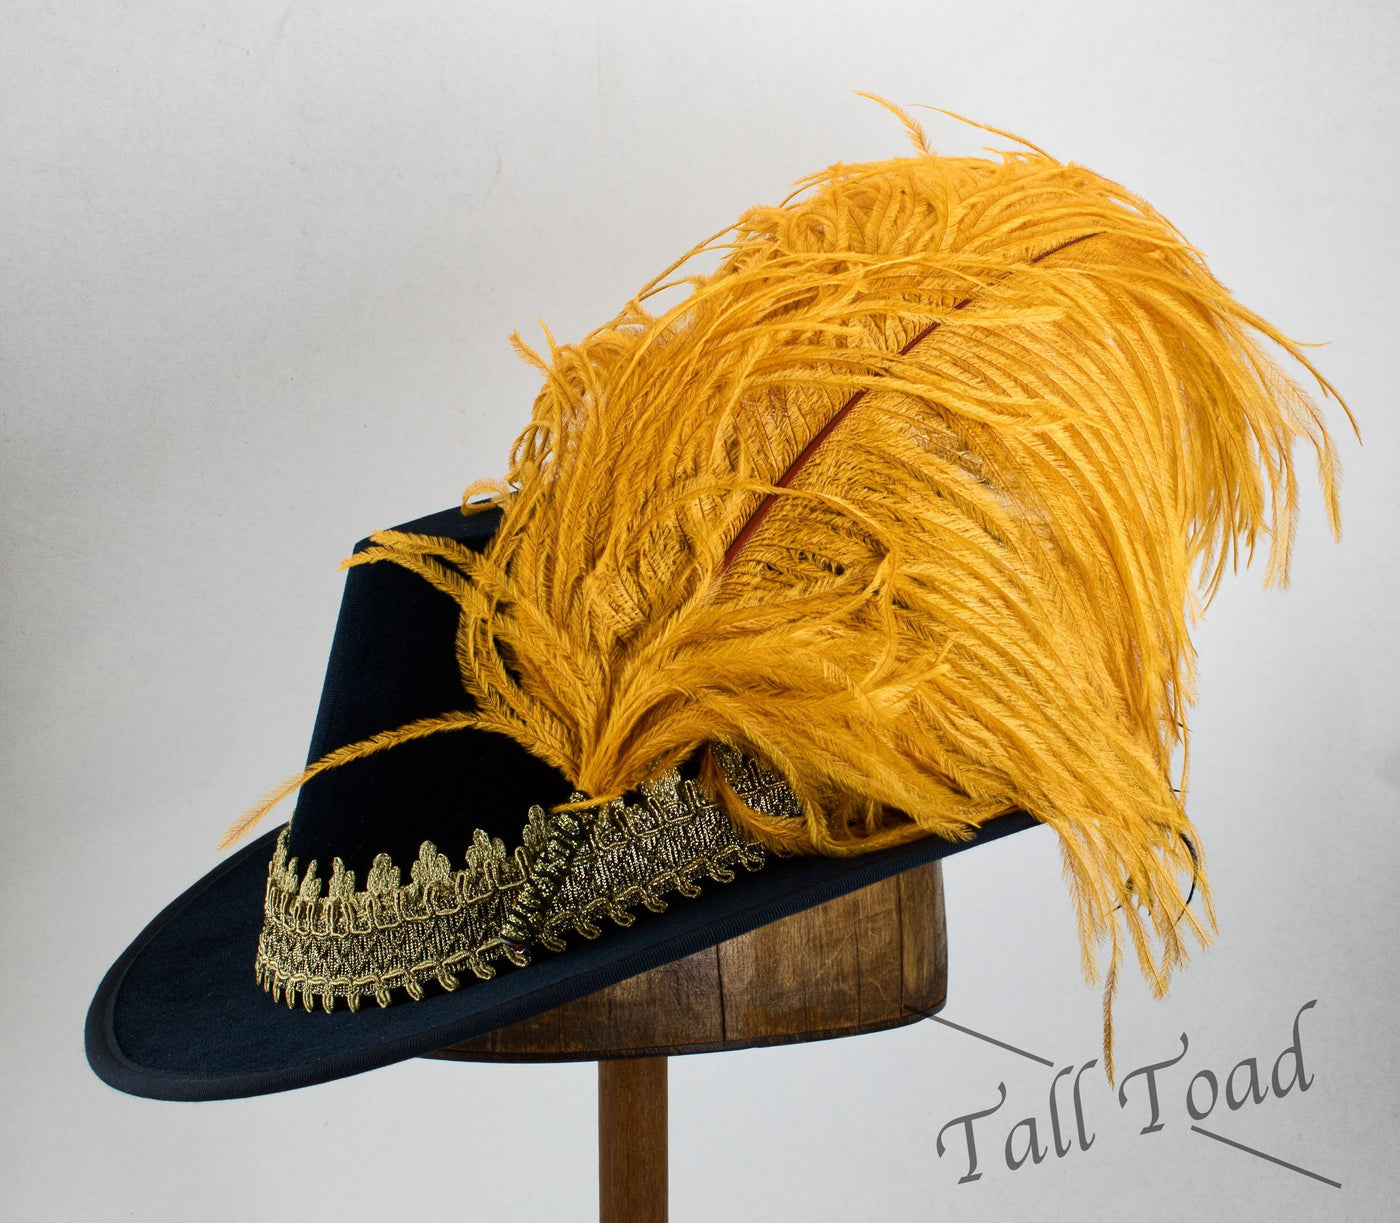 Single Plume Feather Hat Pin - Butterscotch - Tall Toad